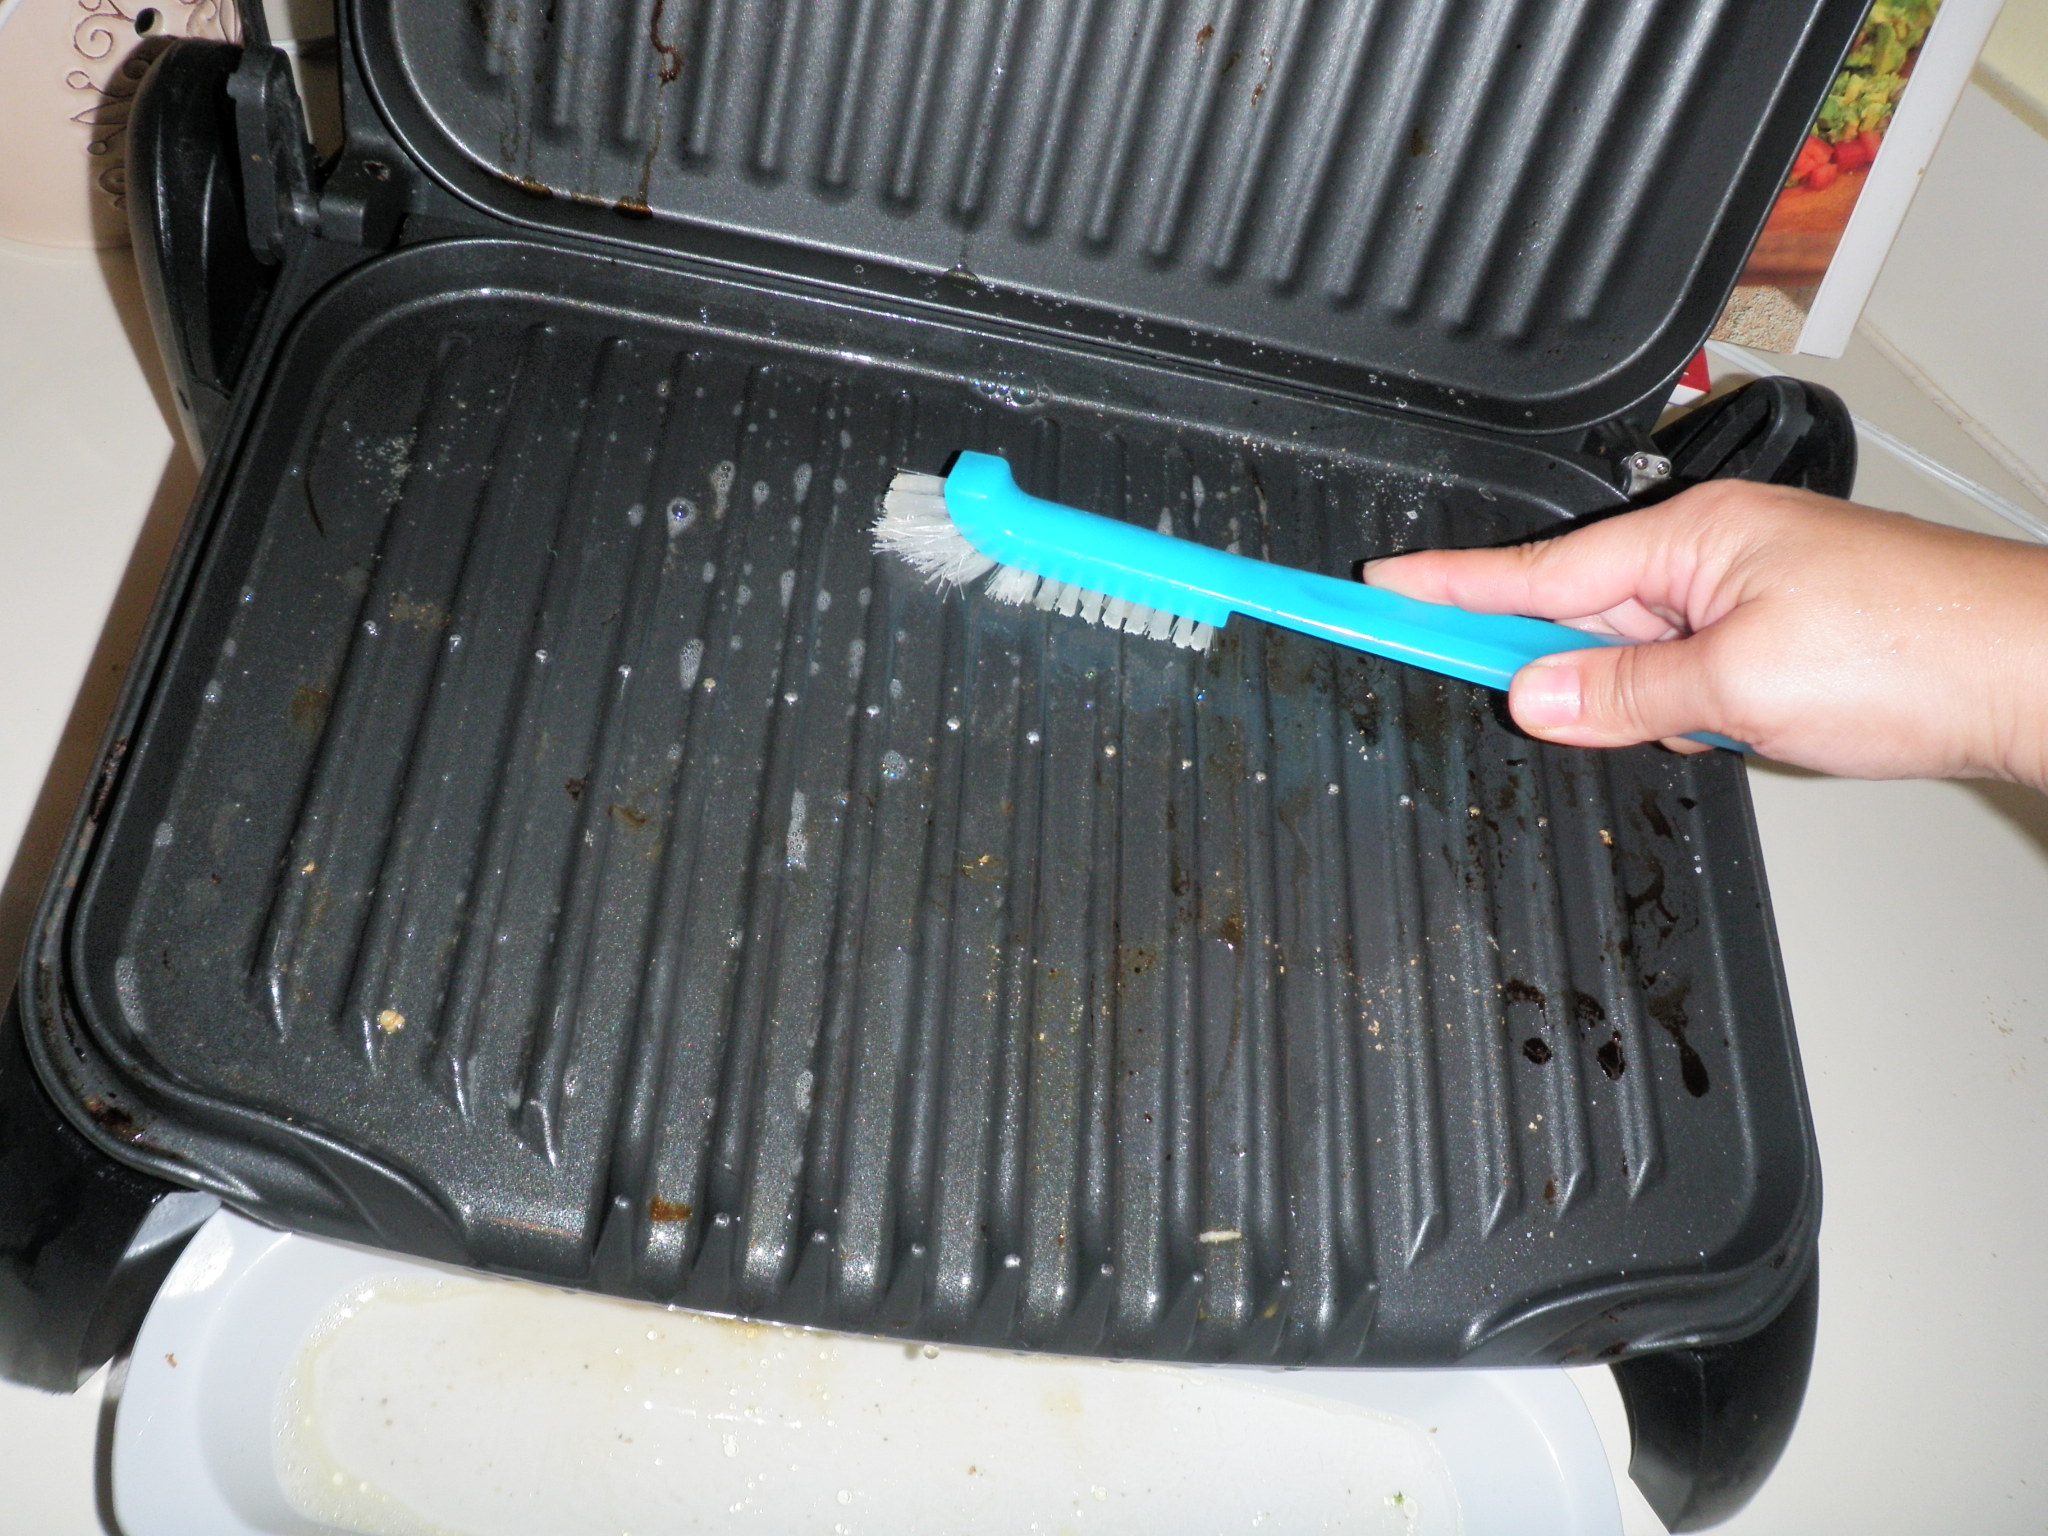 Smart Product: A Bottle Brush now a George Foreman Cleaner